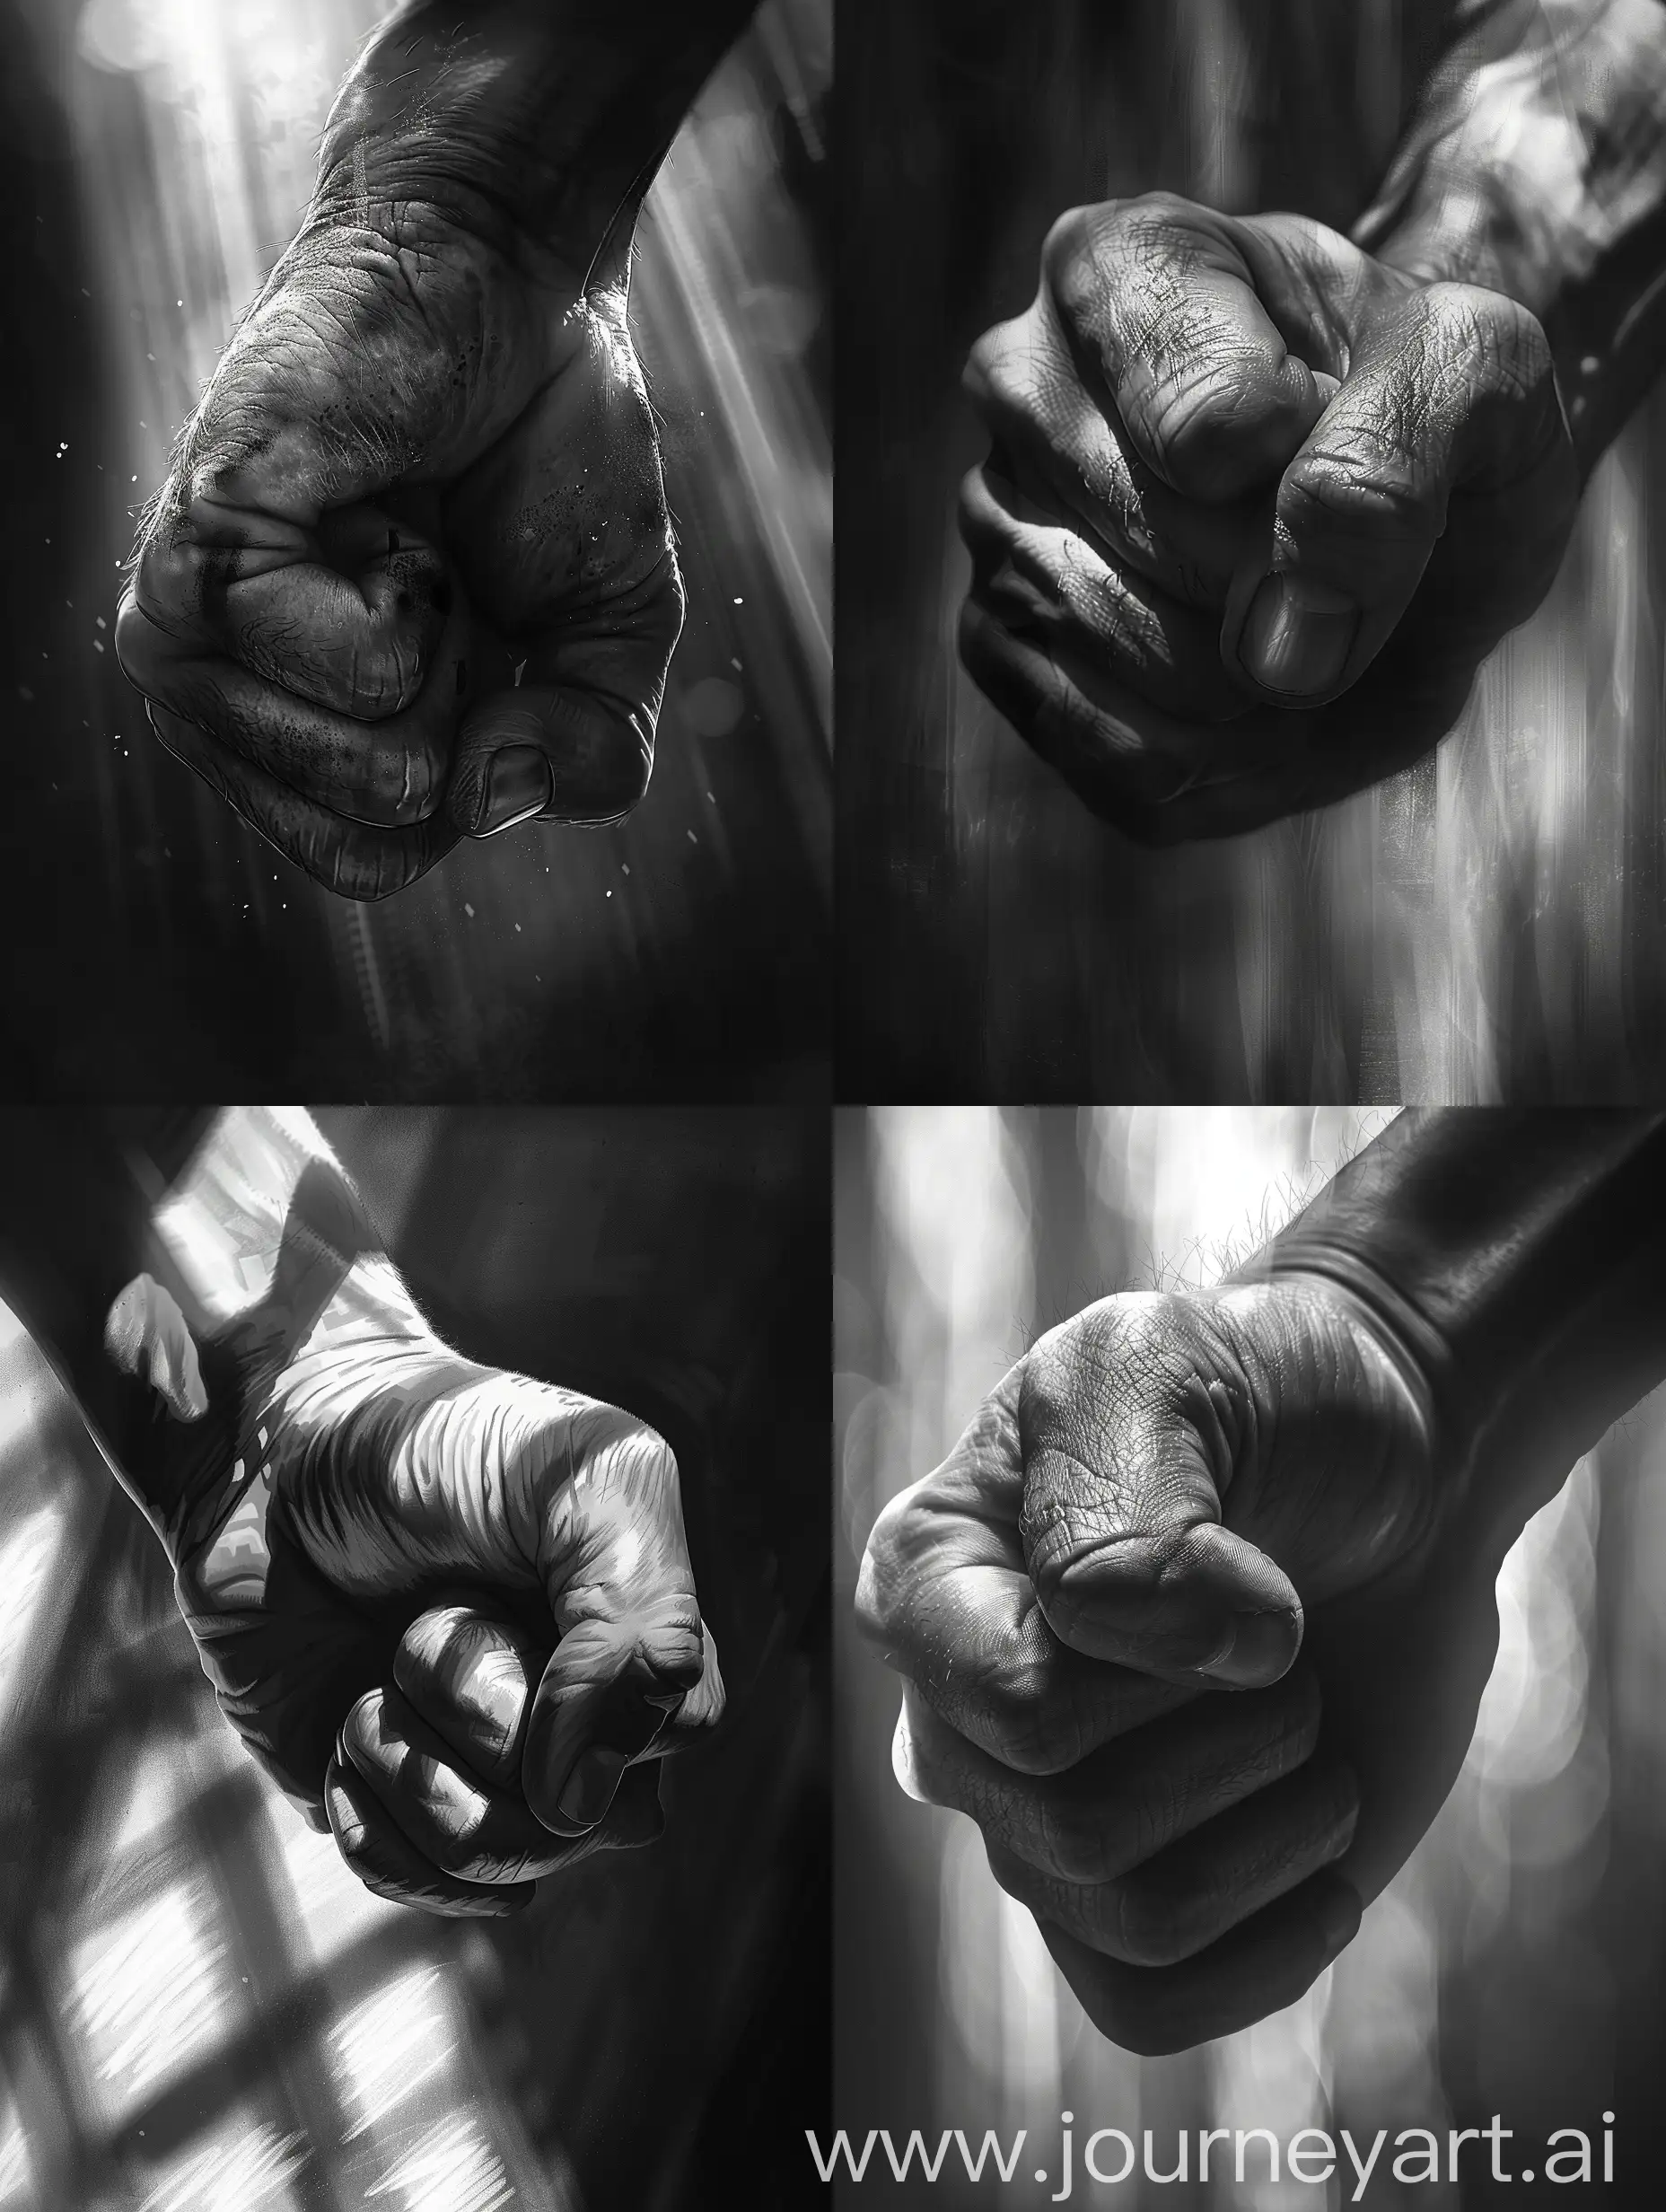 focuses on the character's hand, capturing it in a tight close-up. The hand is strong and determined, with fingers curled tightly into a fist. Light filters through the shadows, casting dramatic highlights and shadows across the knuckles, emphasizing the strength and resolve of the character. There's a sense of tension in the hand, muscles taut with determination. Perhaps there are subtle scars or calluses, indicating a history of hard work and perseverance. The background is blurred, allowing the viewer to focus solely on the powerful symbolism of the clenched fist. Overall, the image exudes a palpable sense of determination and resolve, hinting at the character's unwavering commitment to their goals. Black and white dramatic,anime style,artistic.